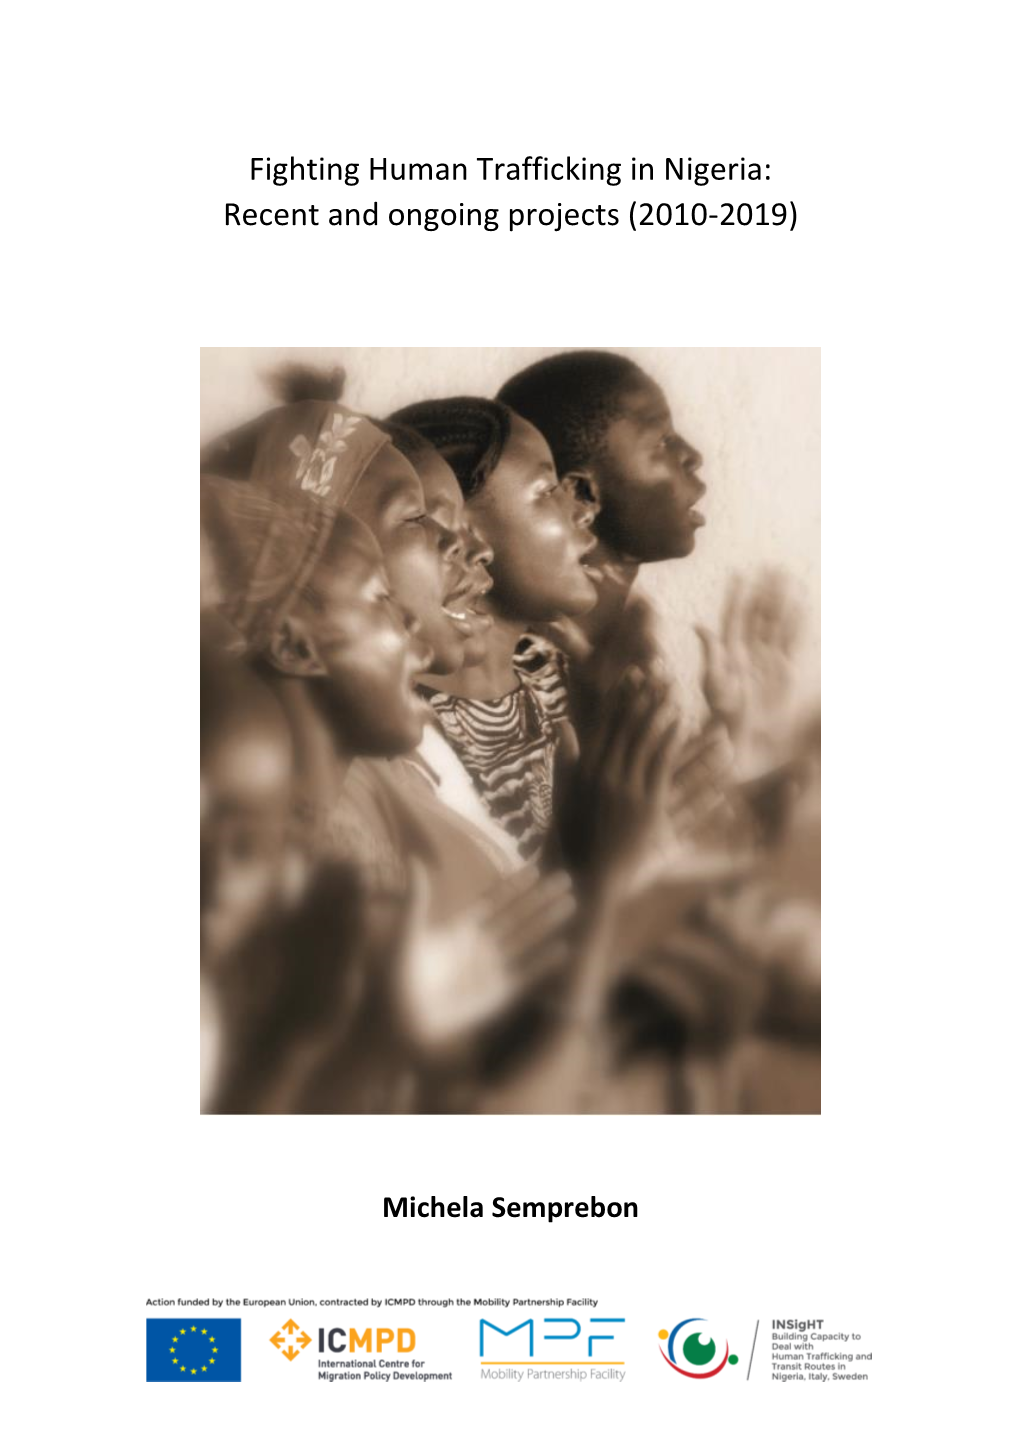 Fighting Human Trafficking in Nigeria: Recent and Ongoing Projects (2010-2019)